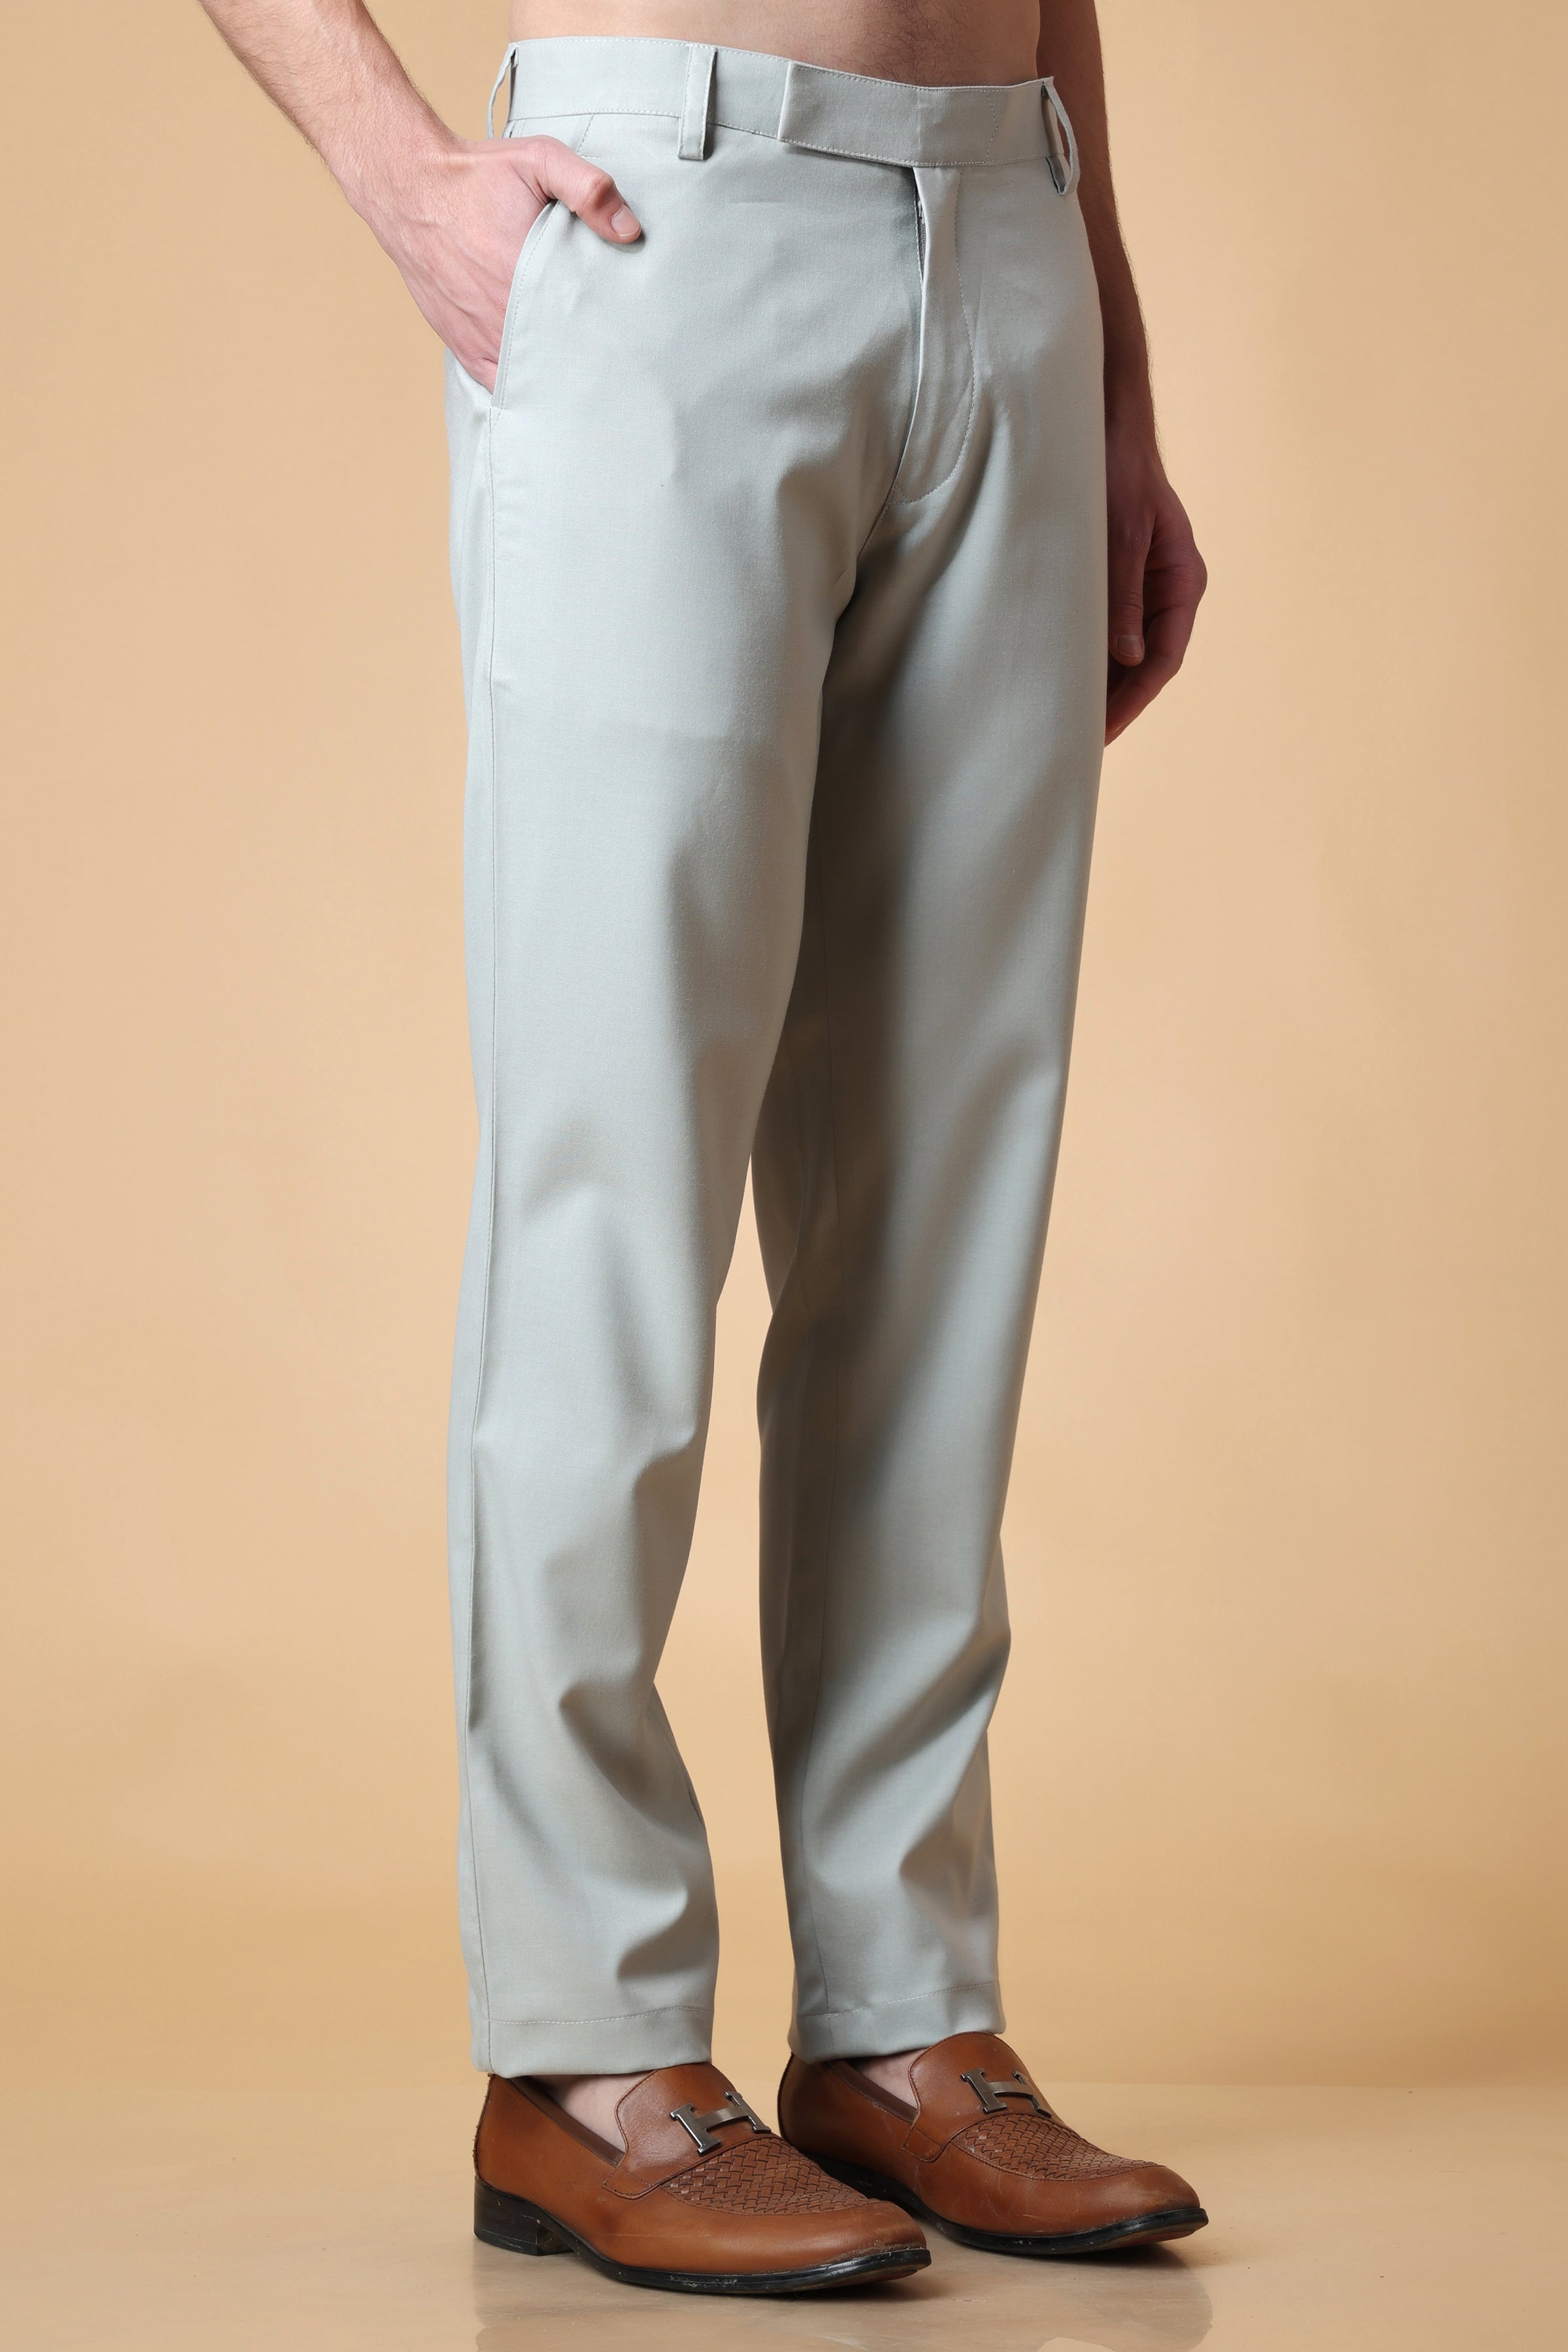 aLL Plus Size Mens Straight Formal Trousers